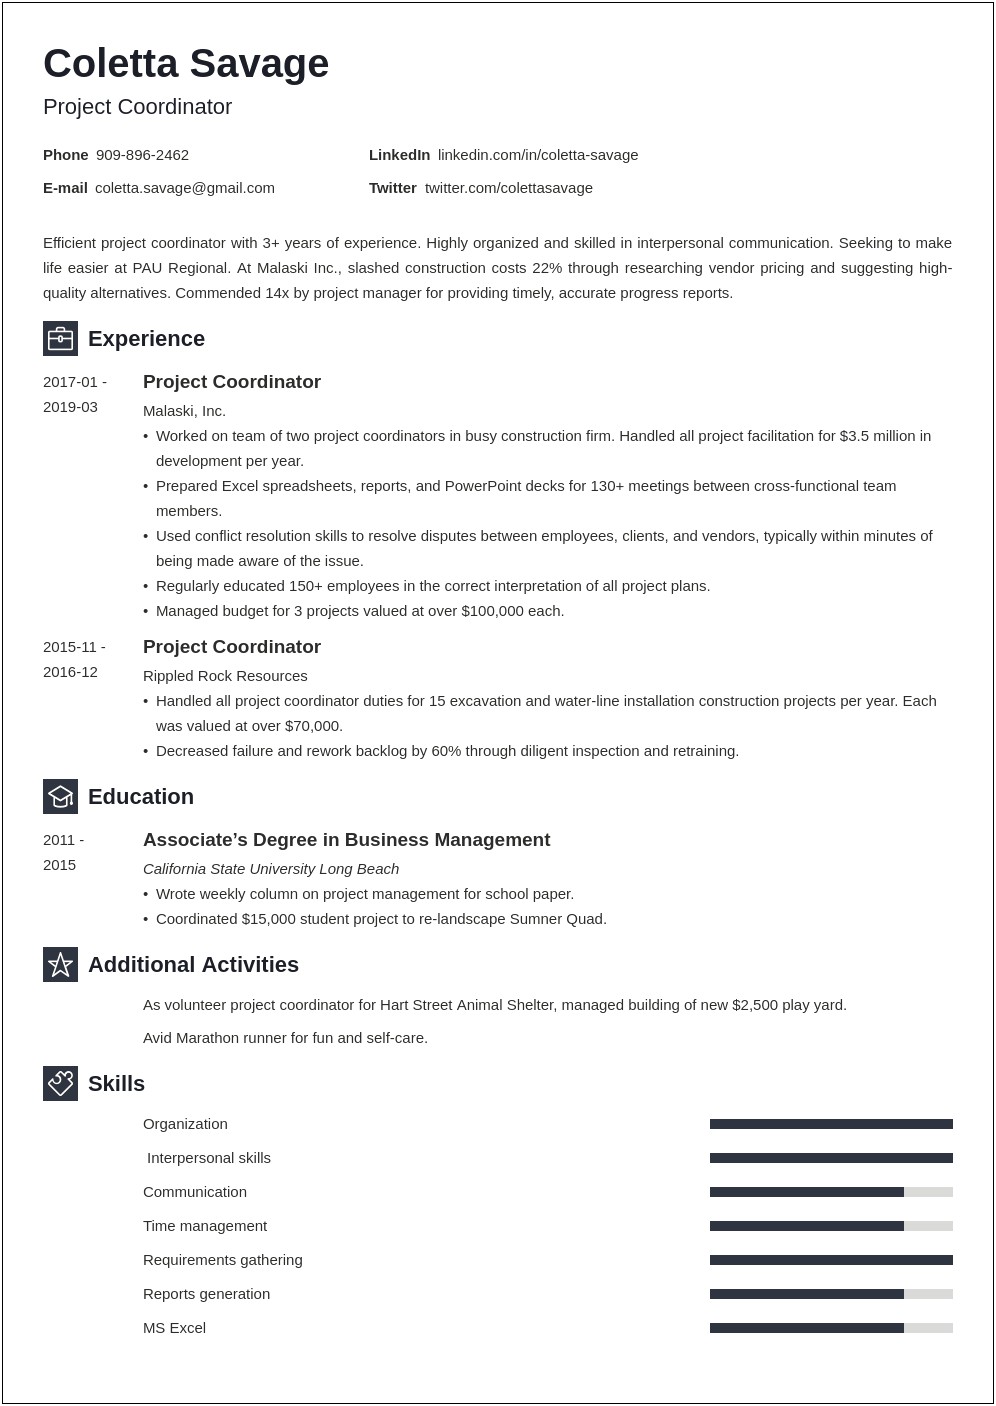 Resume Objective For Construciton Project Coordinator